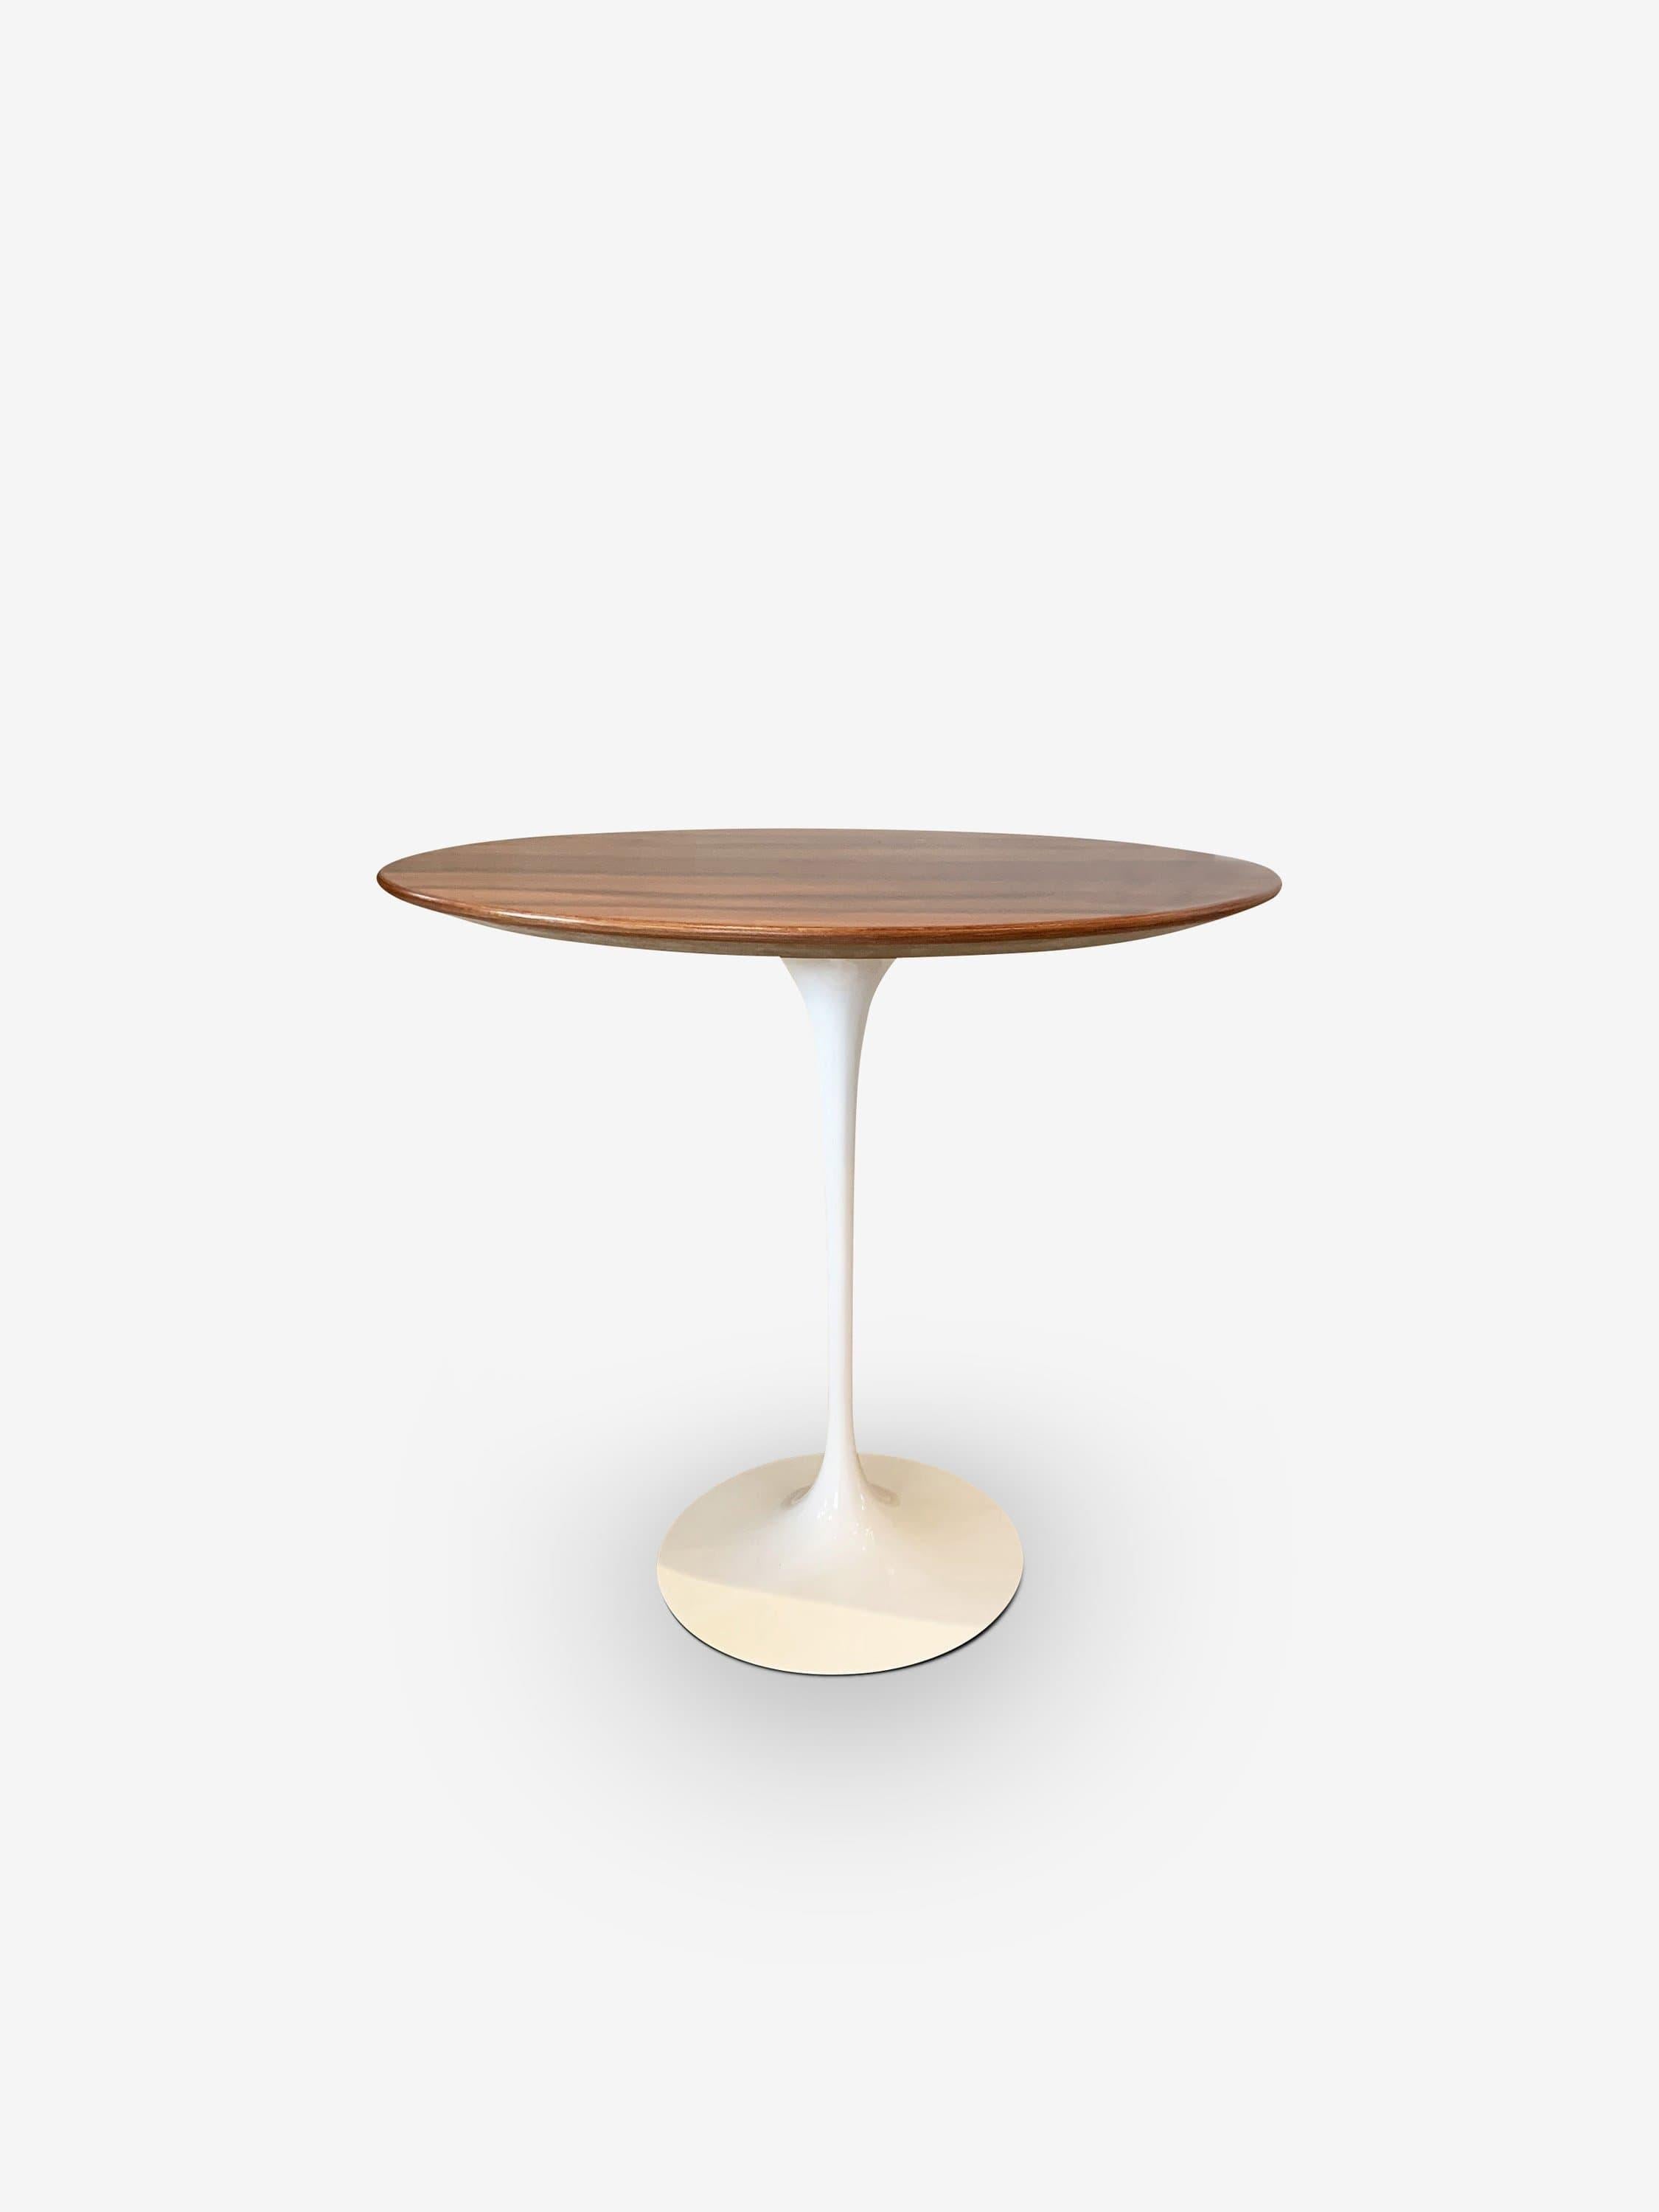 American Eero Saarinen Oval Side Table with Rosewood & White Base by Knoll For Sale